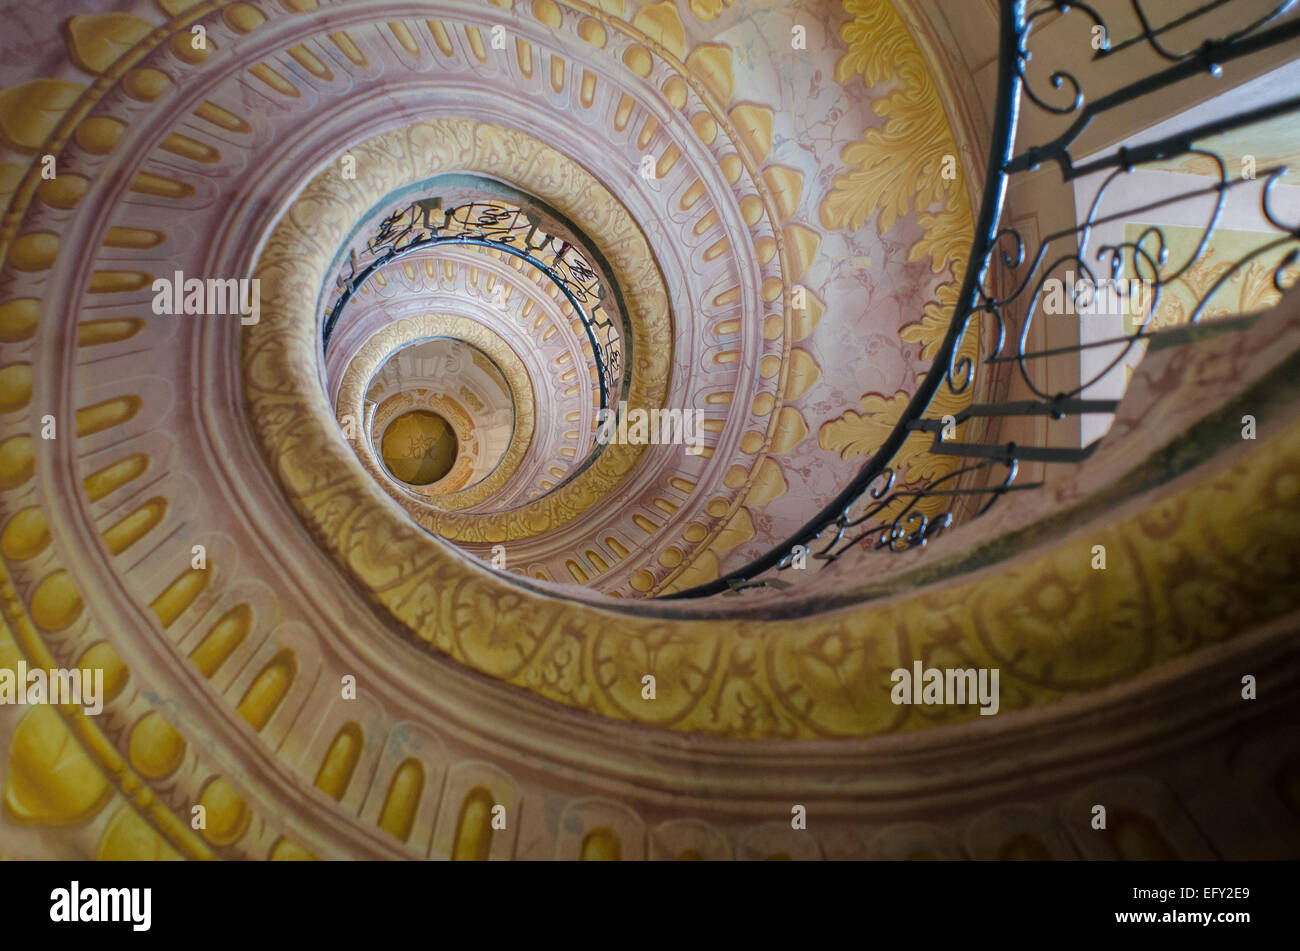 Austria's Benedictine Melk Abbey is renowned for its dizzying spiral staircase. Stock Photo